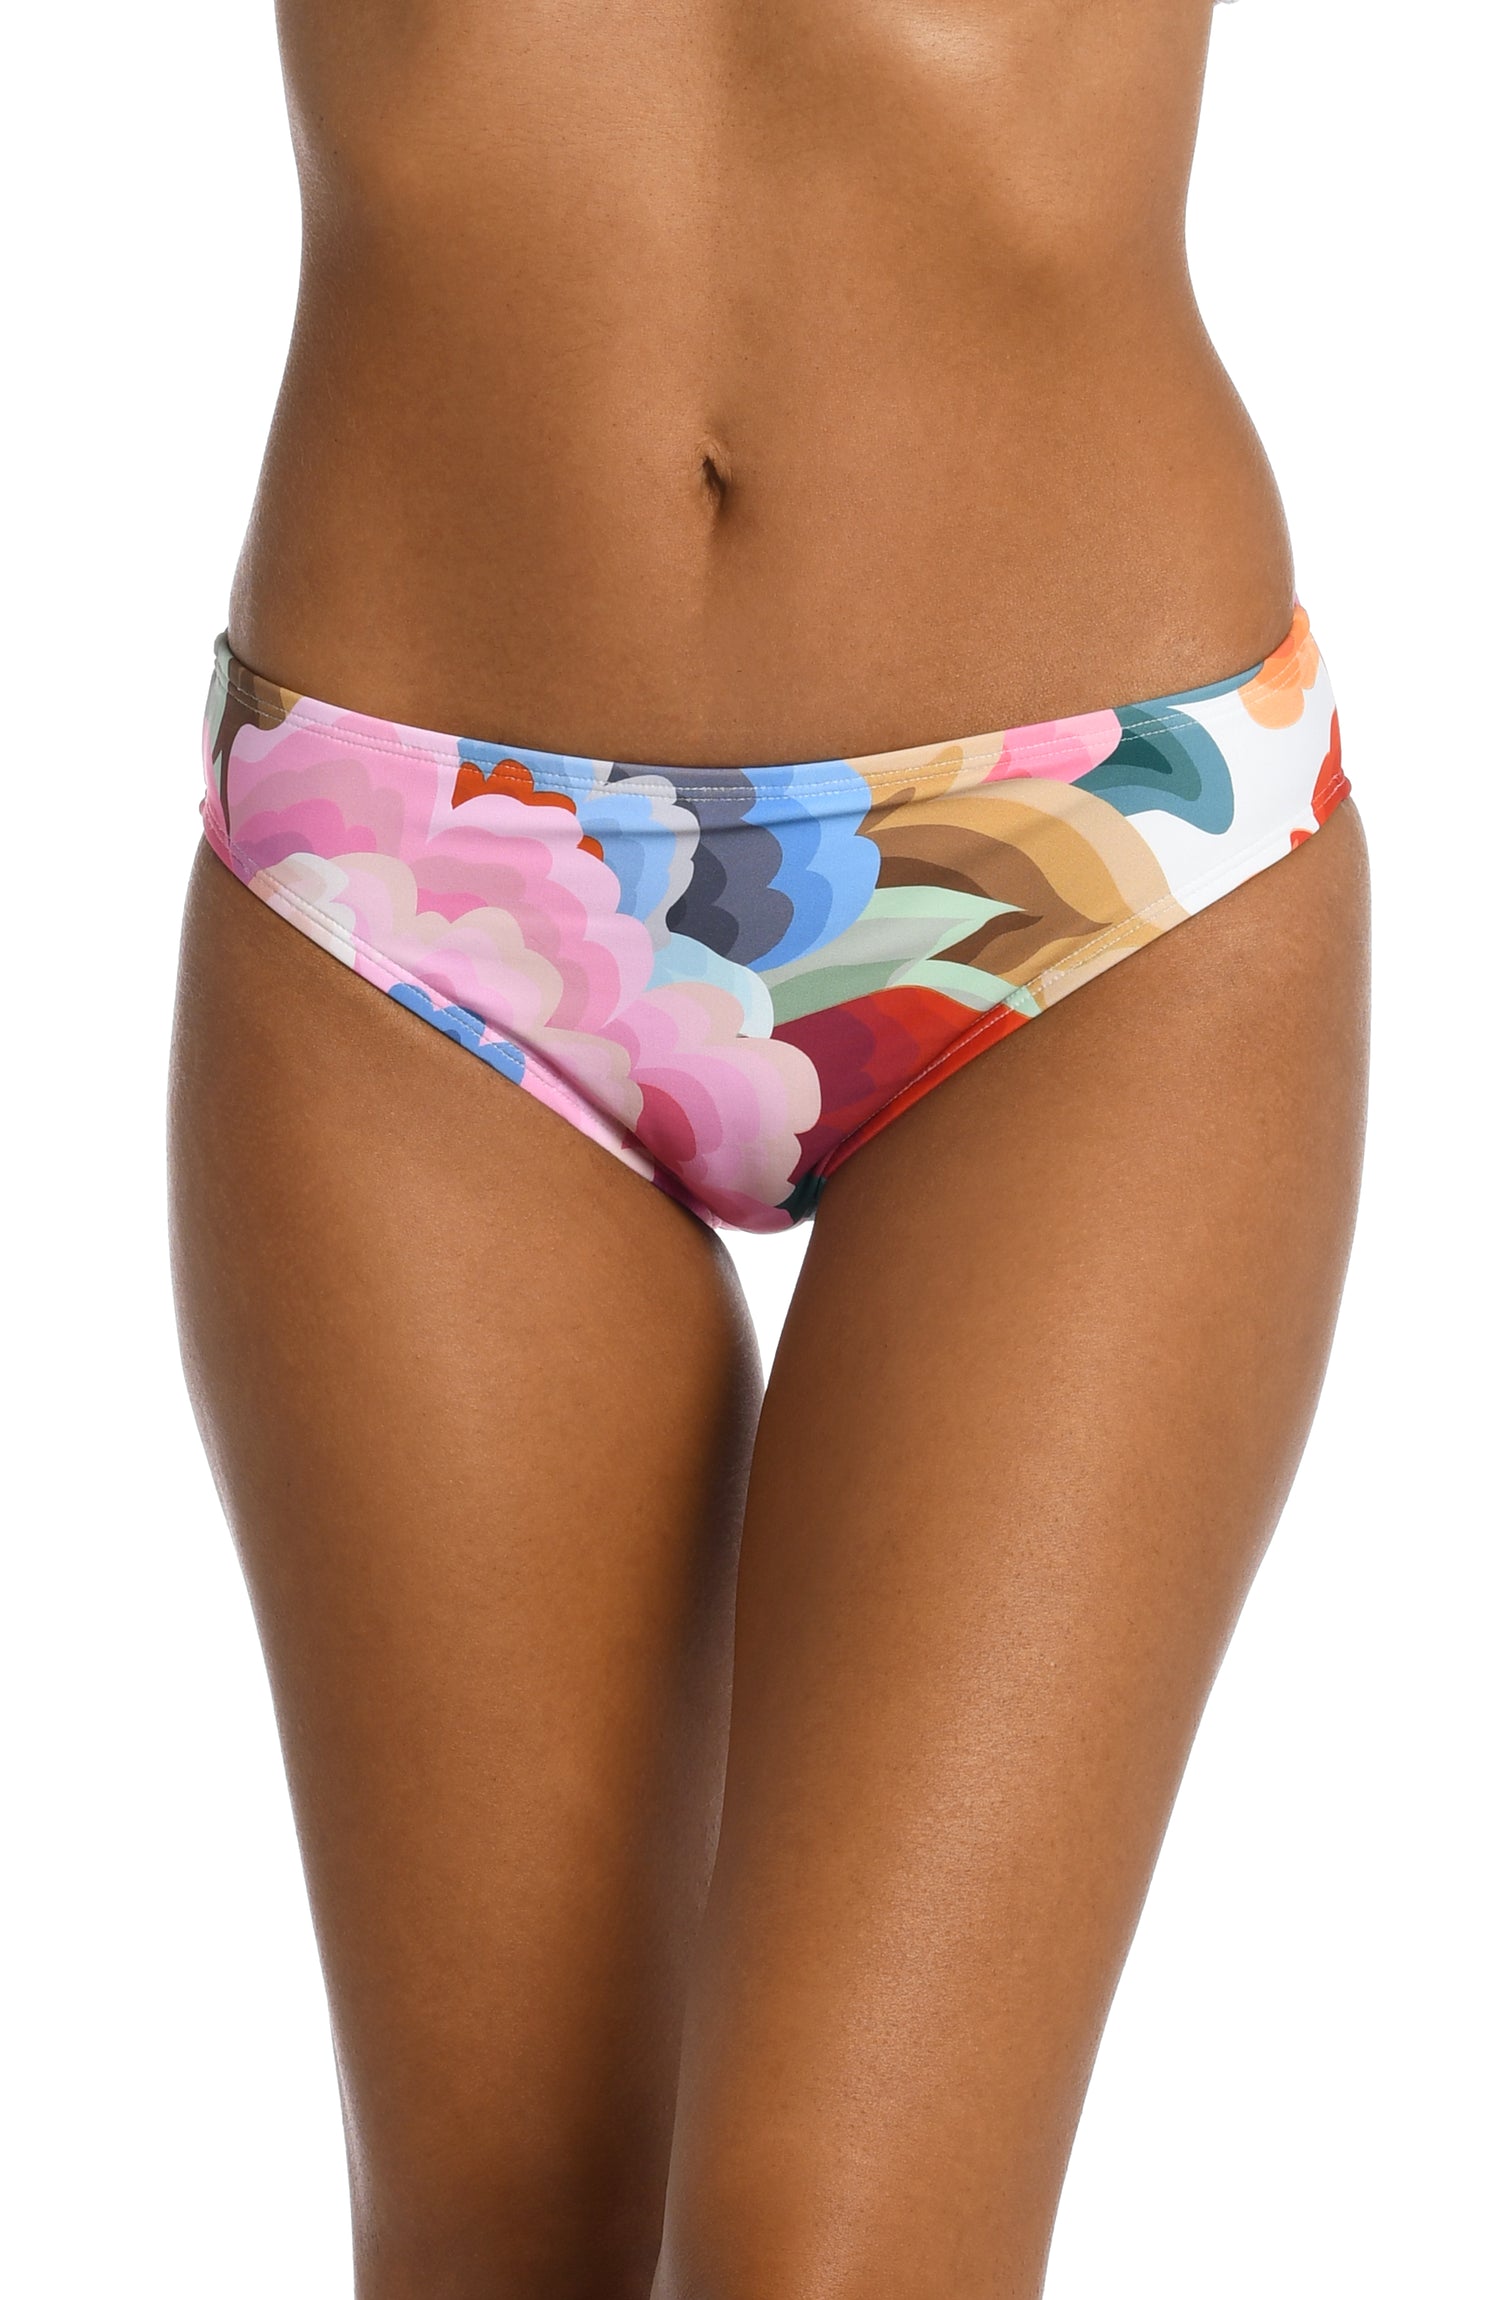 Model is wearing a multi colored floral printed banded hipster bottom from our Floral Rhythm collection!